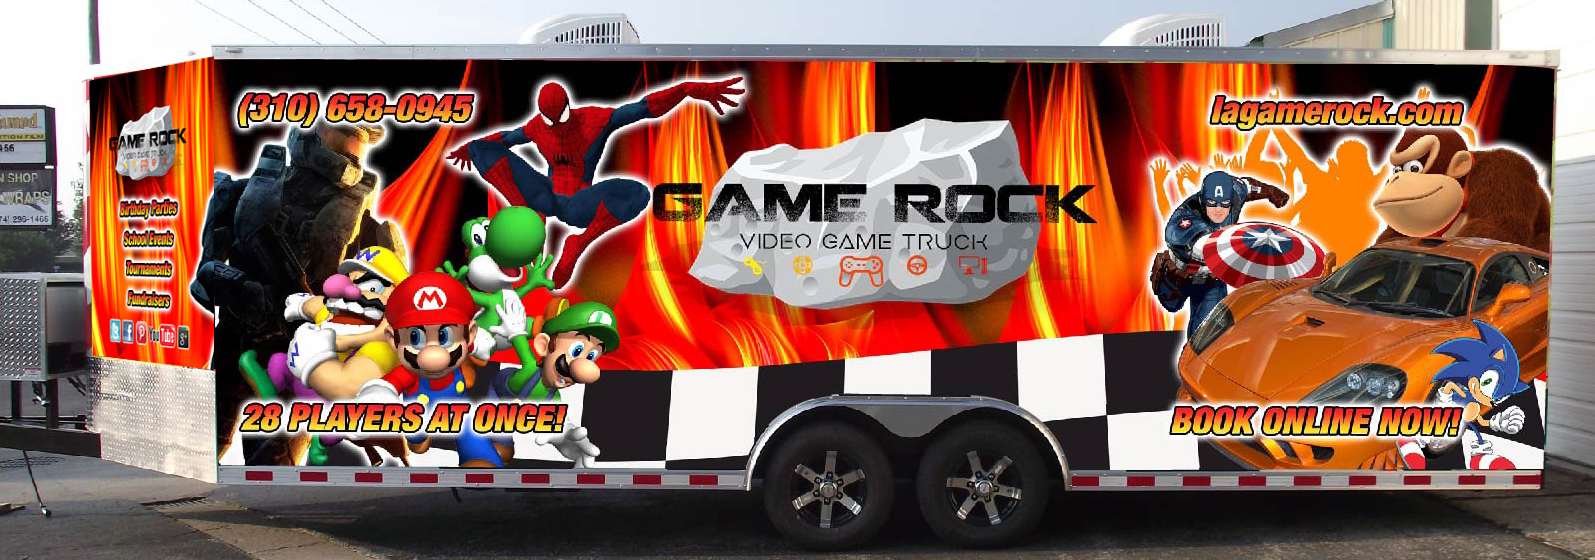 Game Truck With Fortnite In La Video Game Trucks Rental Game Rock Los Angeles California Video Game Truck Birthday Parties More